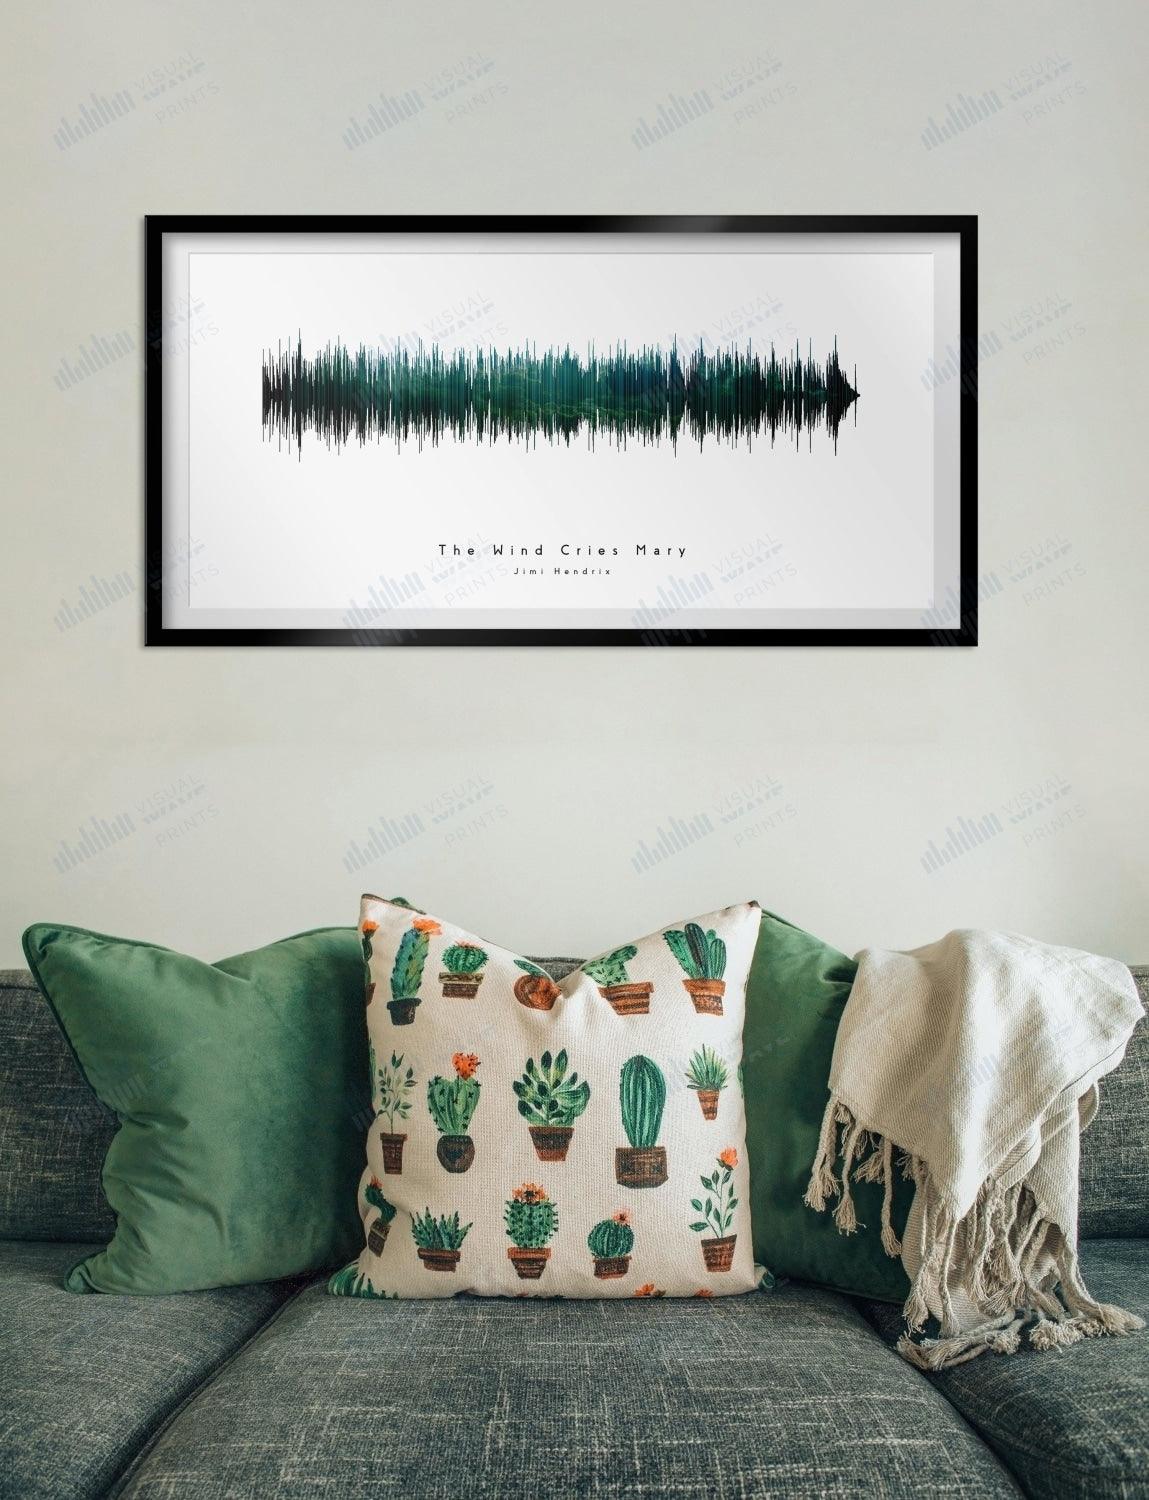 The Wind Cries Mary by Jimi Hendrix - Visual Wave Prints